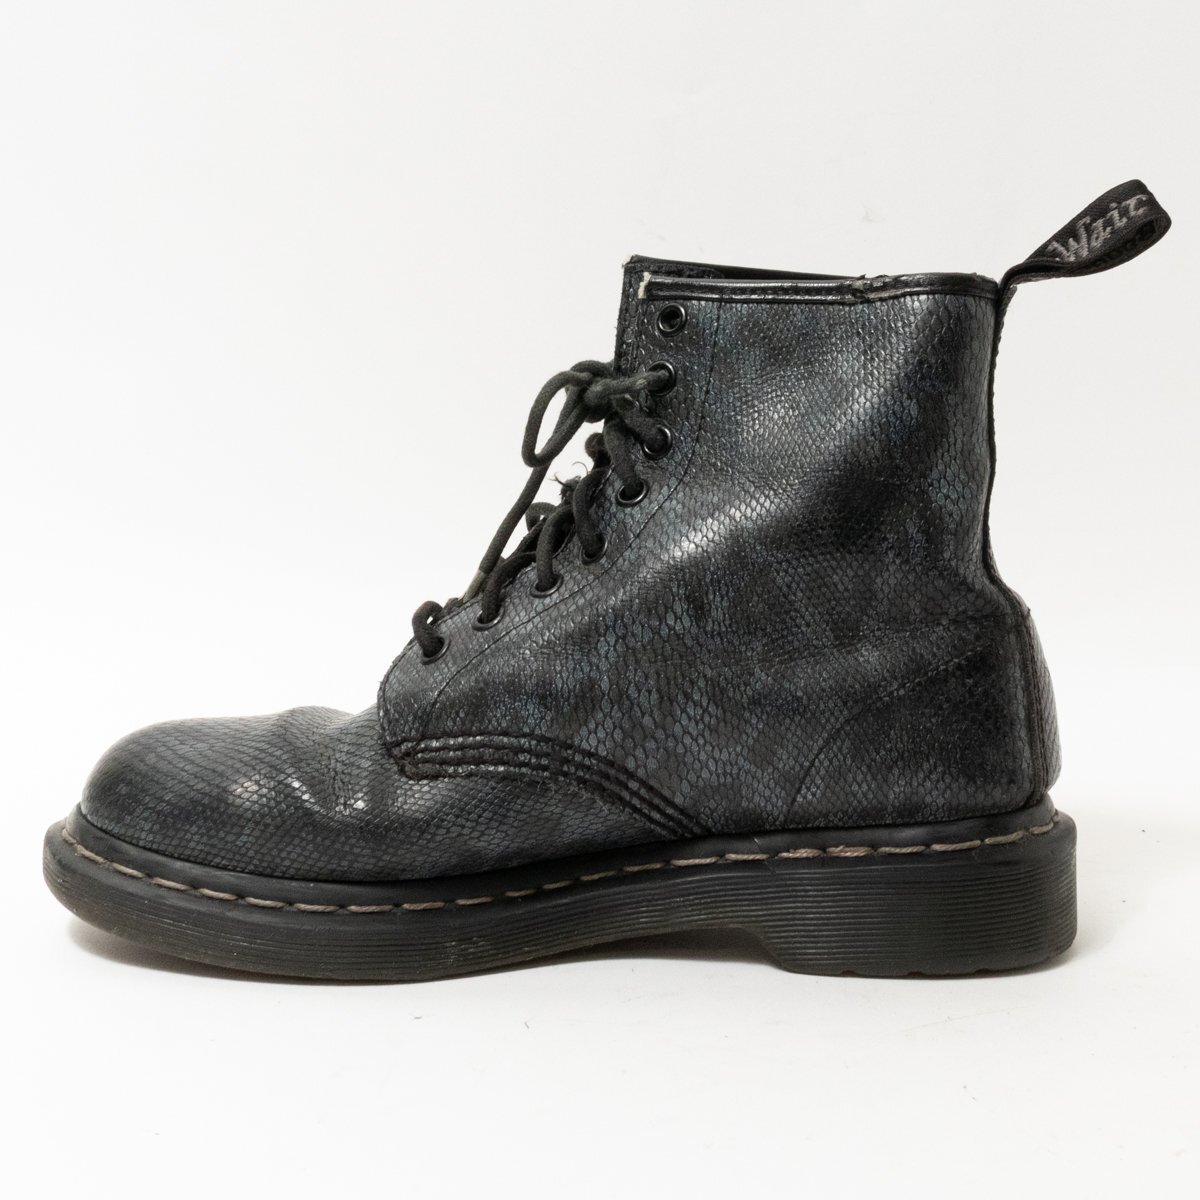 [1 jpy start ]Dr.Martens Dr. Martens python type pushed .8 hole boots race up shoes shoes navy black US7 24.5cm corresponding 